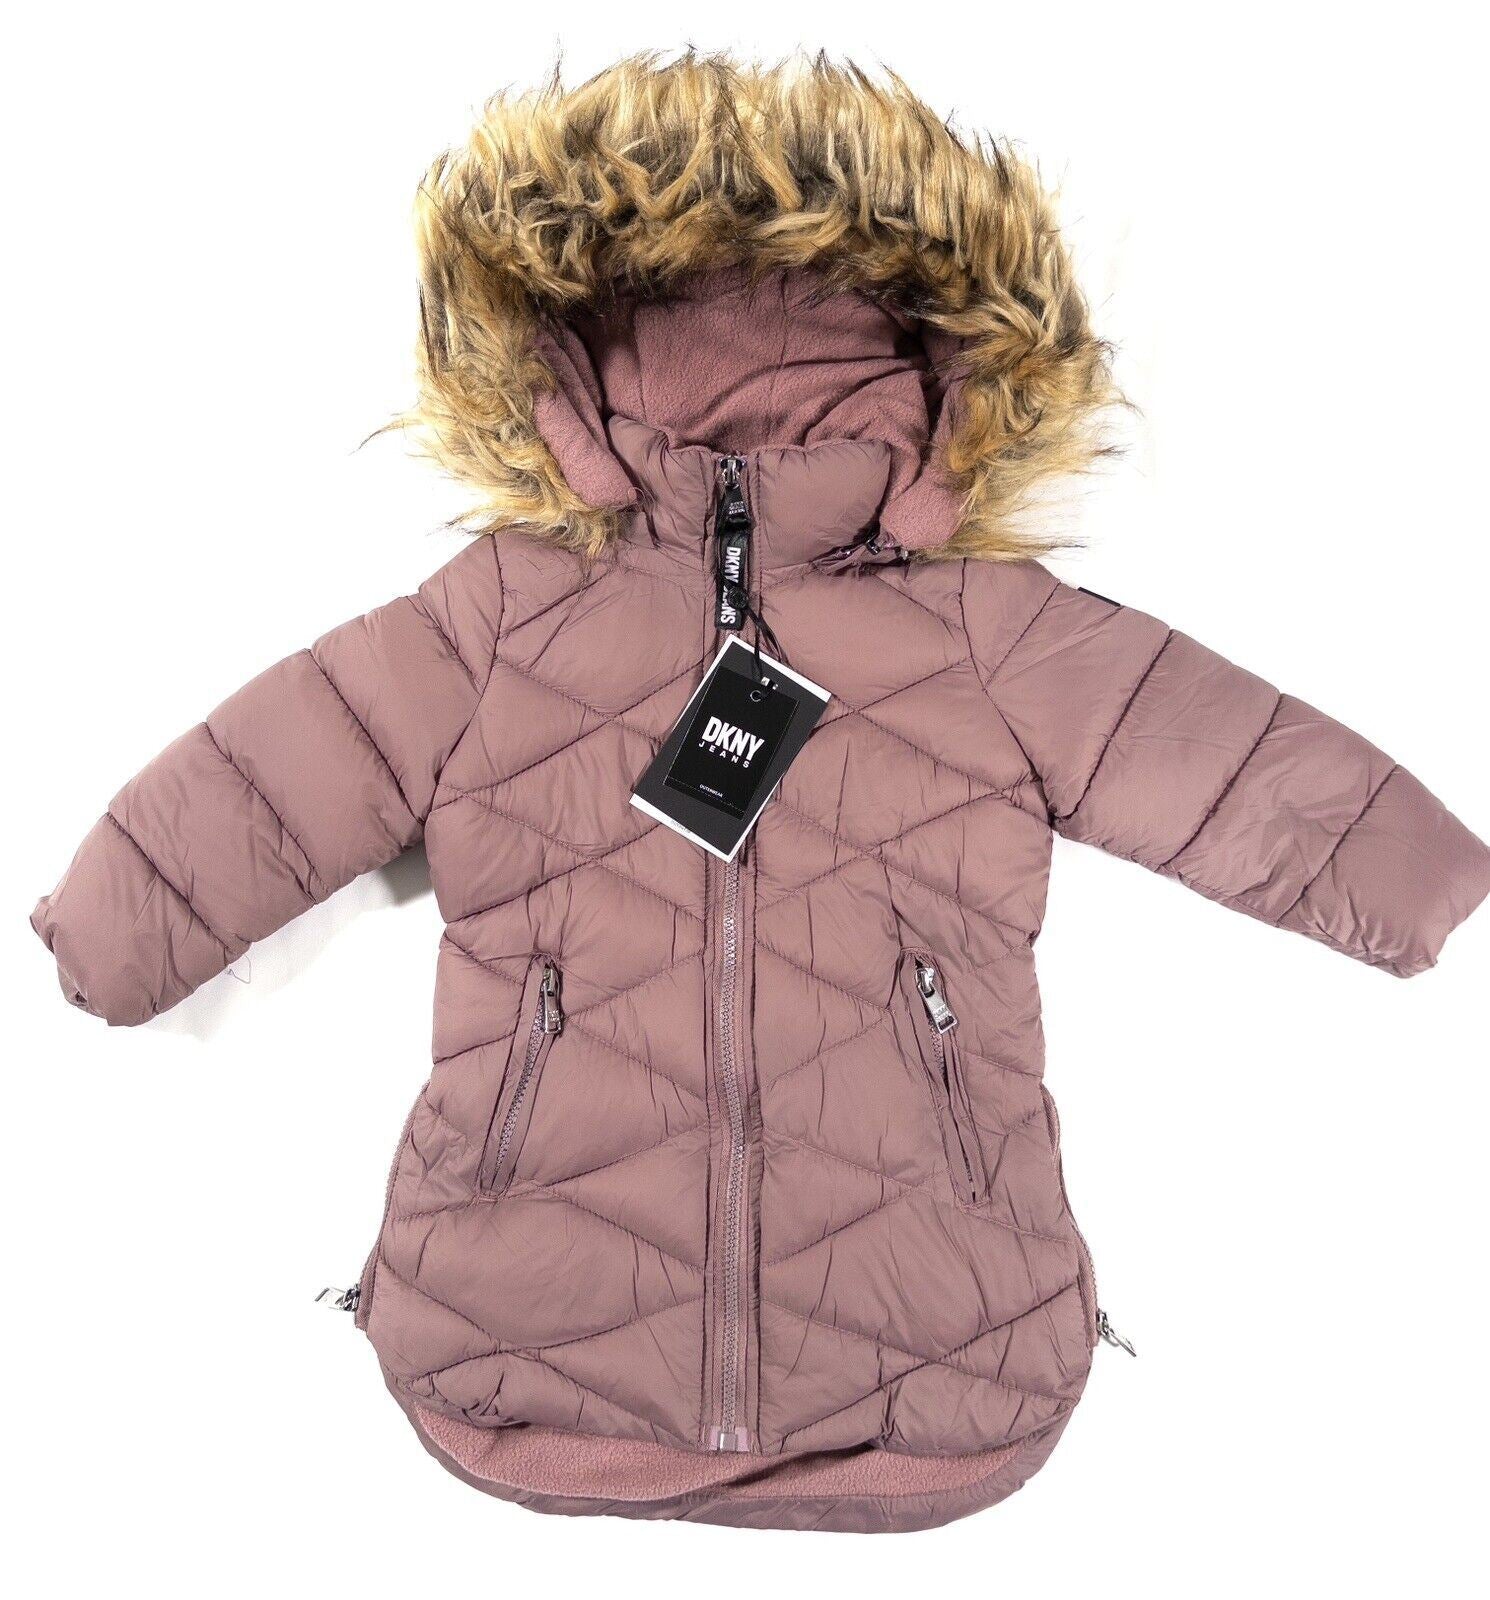 DKNY JEANS Baby Girls Puffer Coat Hooded Purple Size UK 12 Months